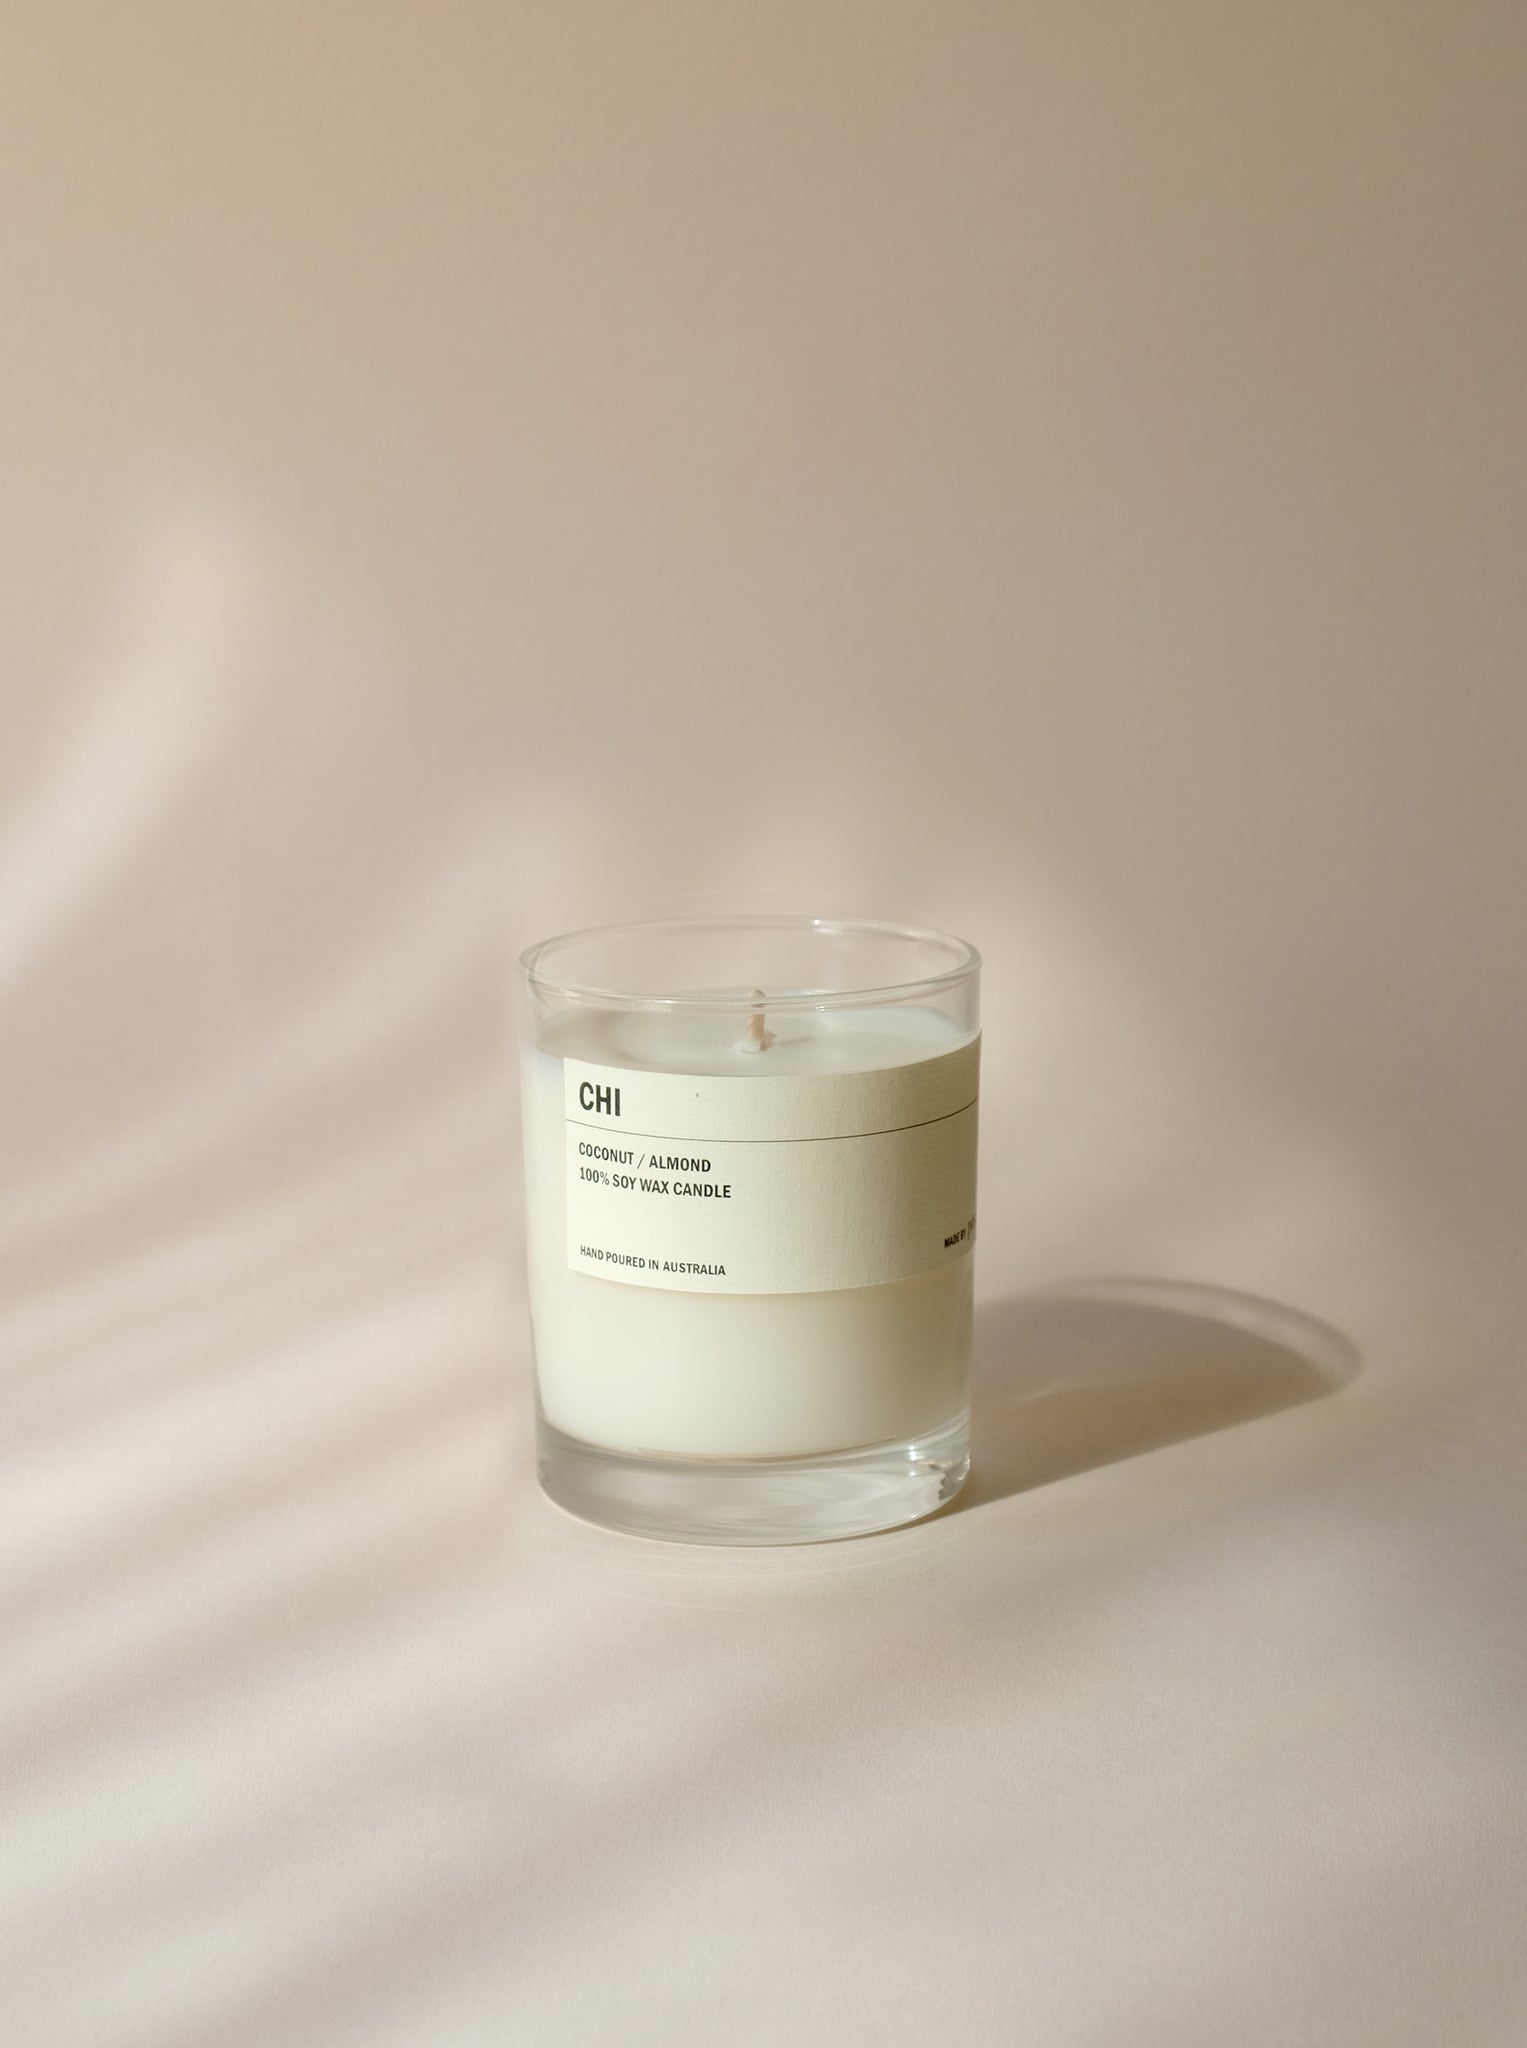 CHI: Coconut / Almond Clear Candle 300g